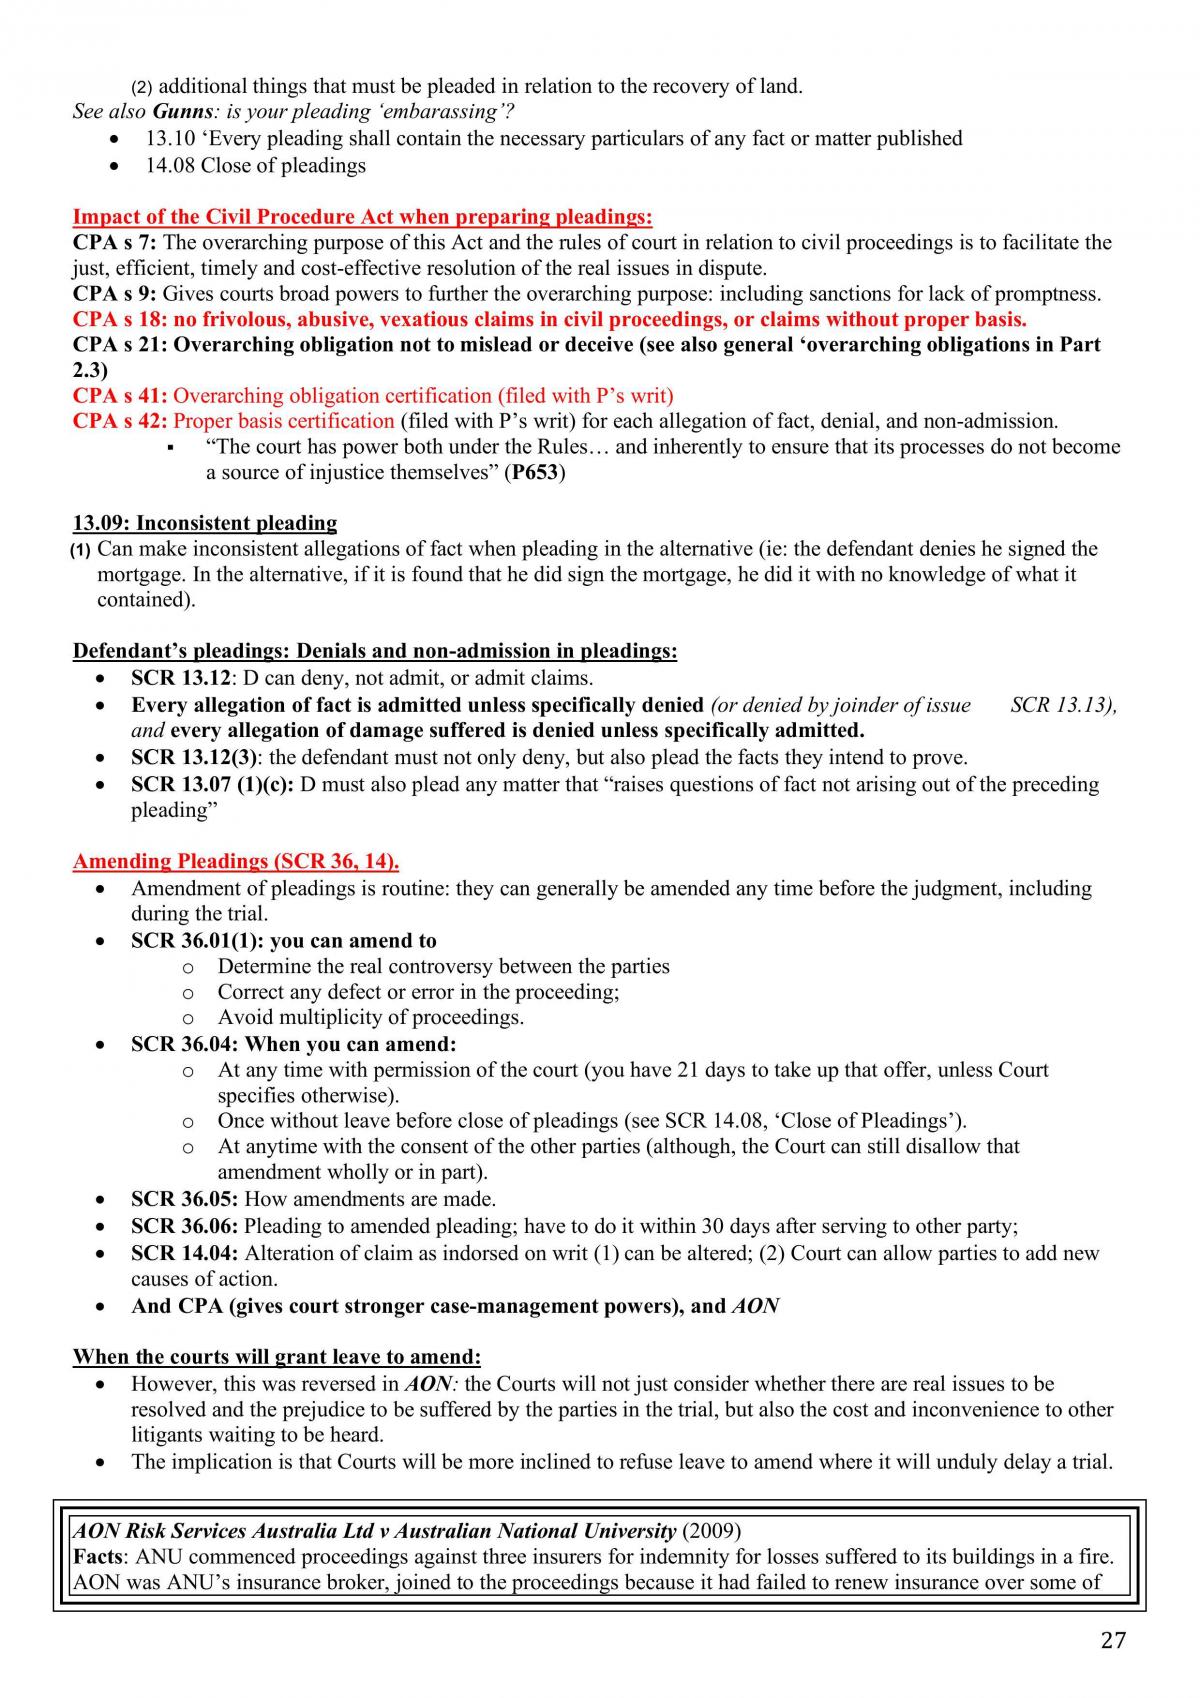 Dispute Resolution Exam Notes - Page 27